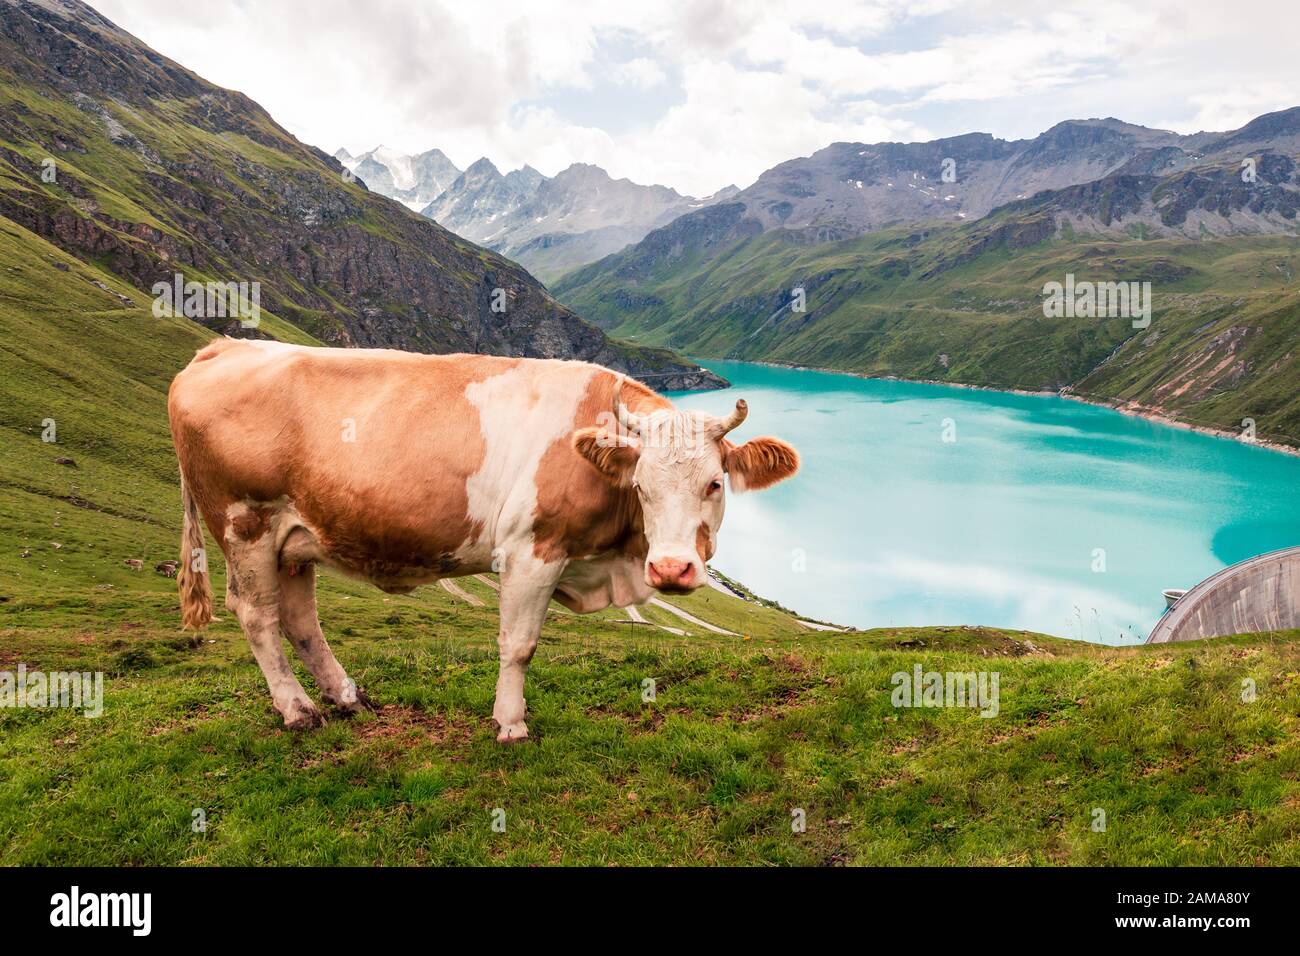 Cow standing up looking at camera near reservoir Lac de Moiry high up in the Pennine Alps. Grimentz, Valais, Switzerland, Europe Stock Photo